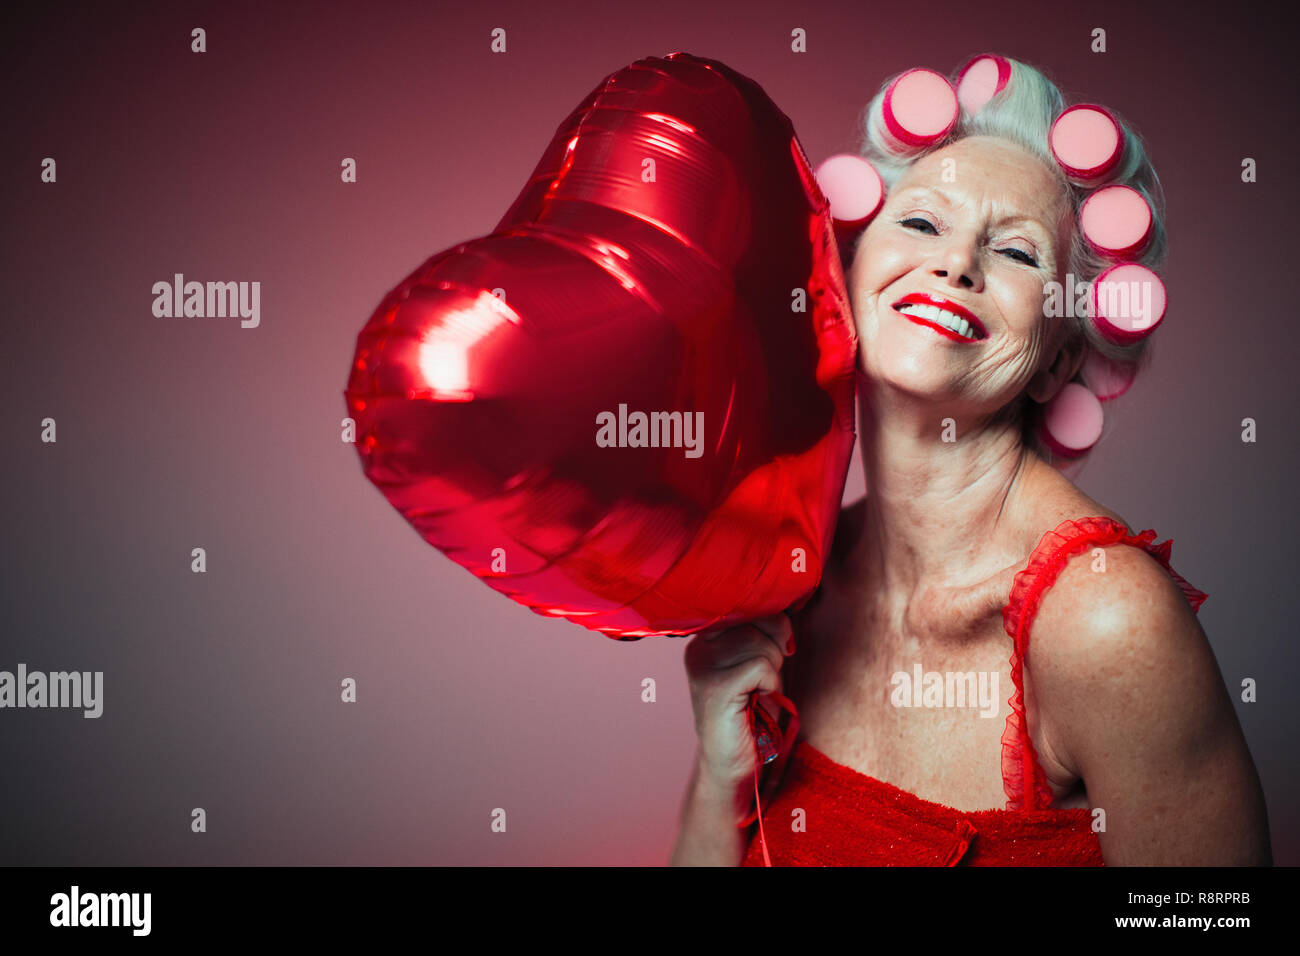 Portrait playful senior woman with hair in curlers holding heart-shape balloon Stock Photo